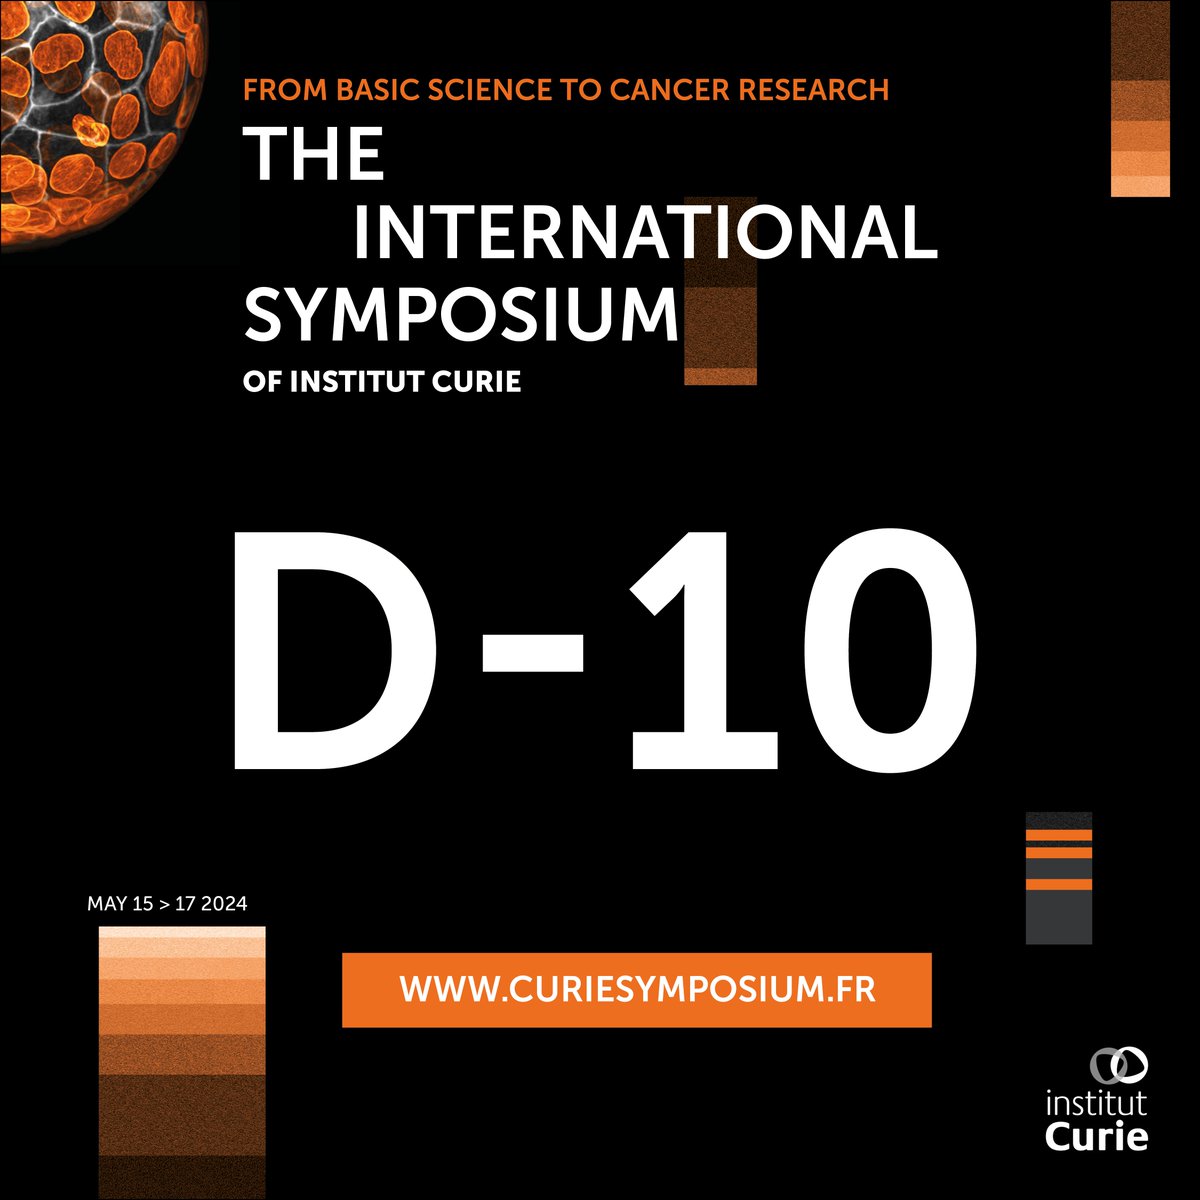 ⏰ 10 days to go for the #CurieSymposium! Join a wide range of internationally renowned experts in a interdisciplinary setting at @Maison_Chimie and delve into the latest discoveries from basic science to #CancerResearch. Secure your spot now on: curiesymposium.fr/registration